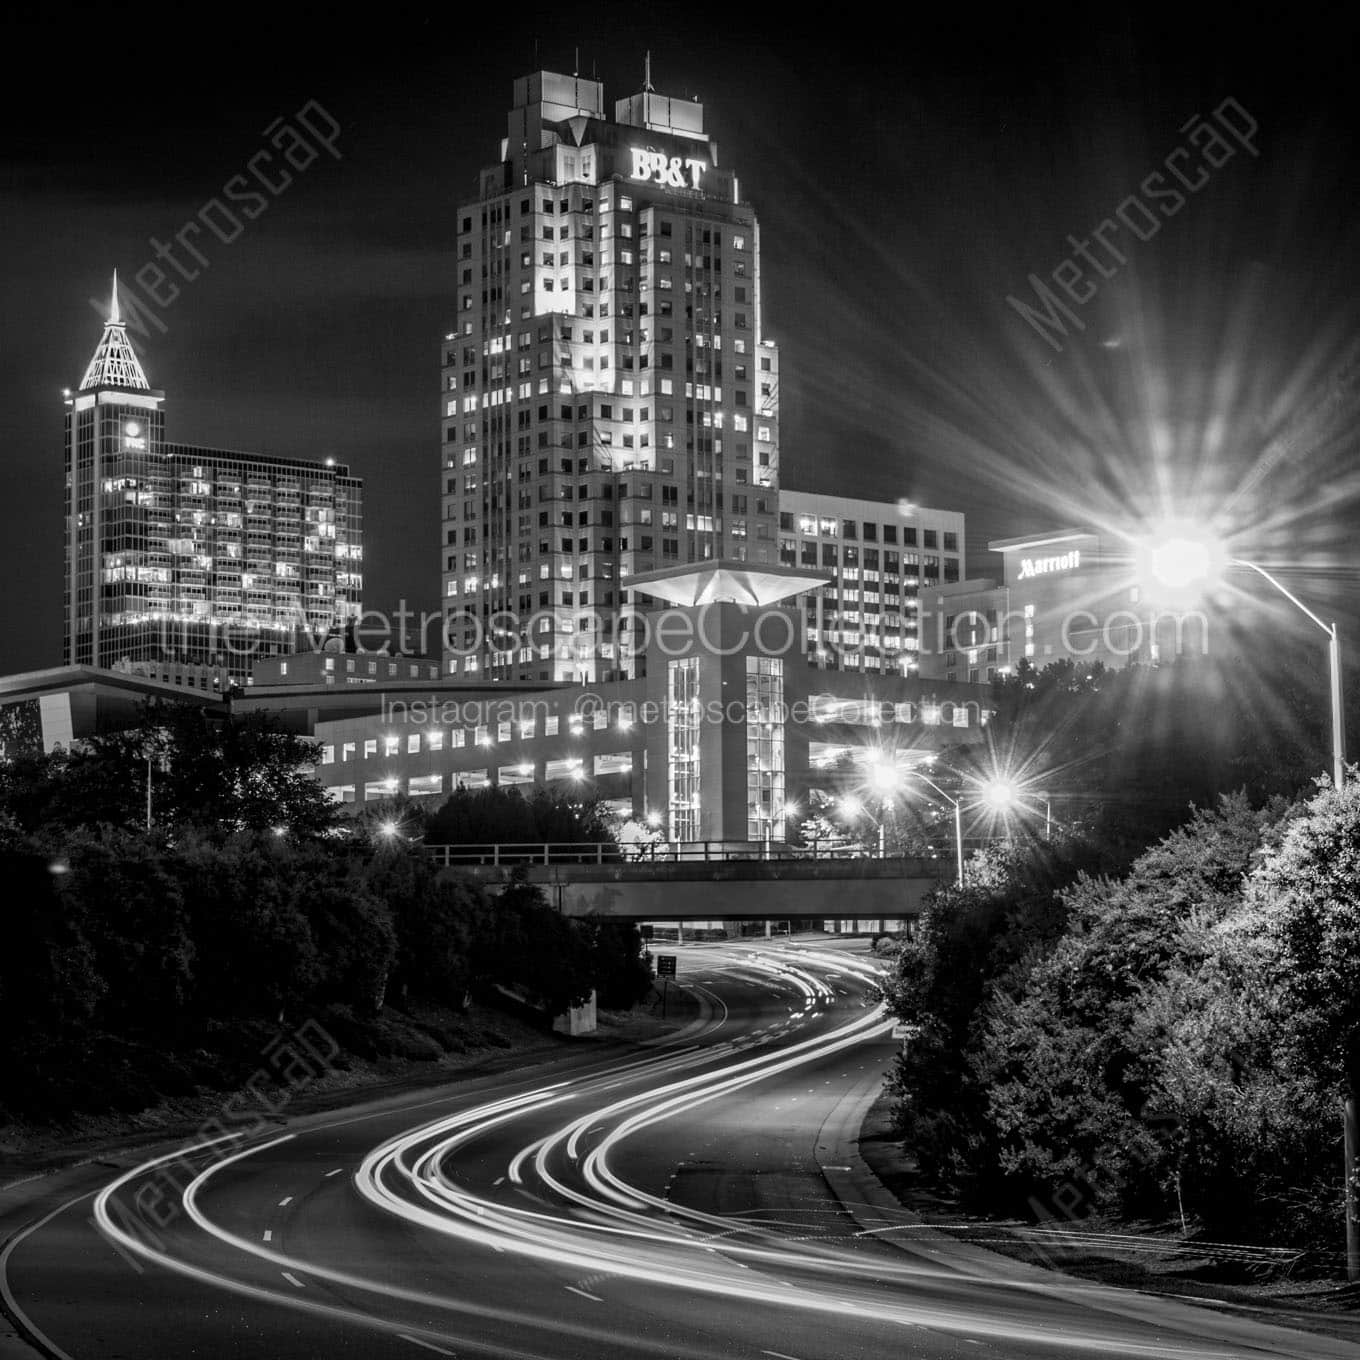 downtown raleigh nc skyline at night mcdowell Black & White Wall Art